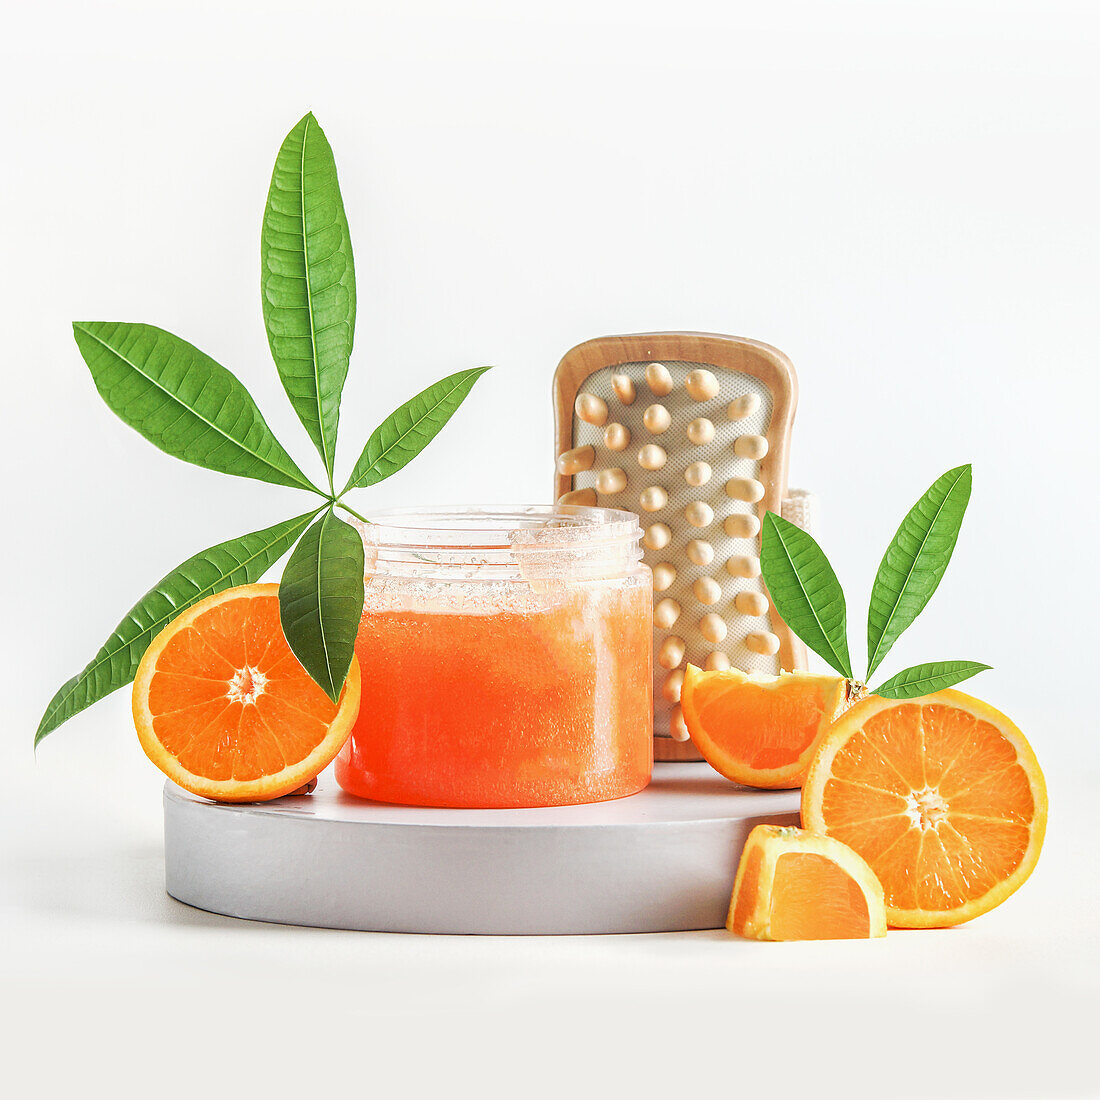 Spa setting with orange sugar scrub in jar with tropical green leaves, wooden massage brush and orange fruits. Healthy skin care and treatment with natural bath and wellness products. Front view